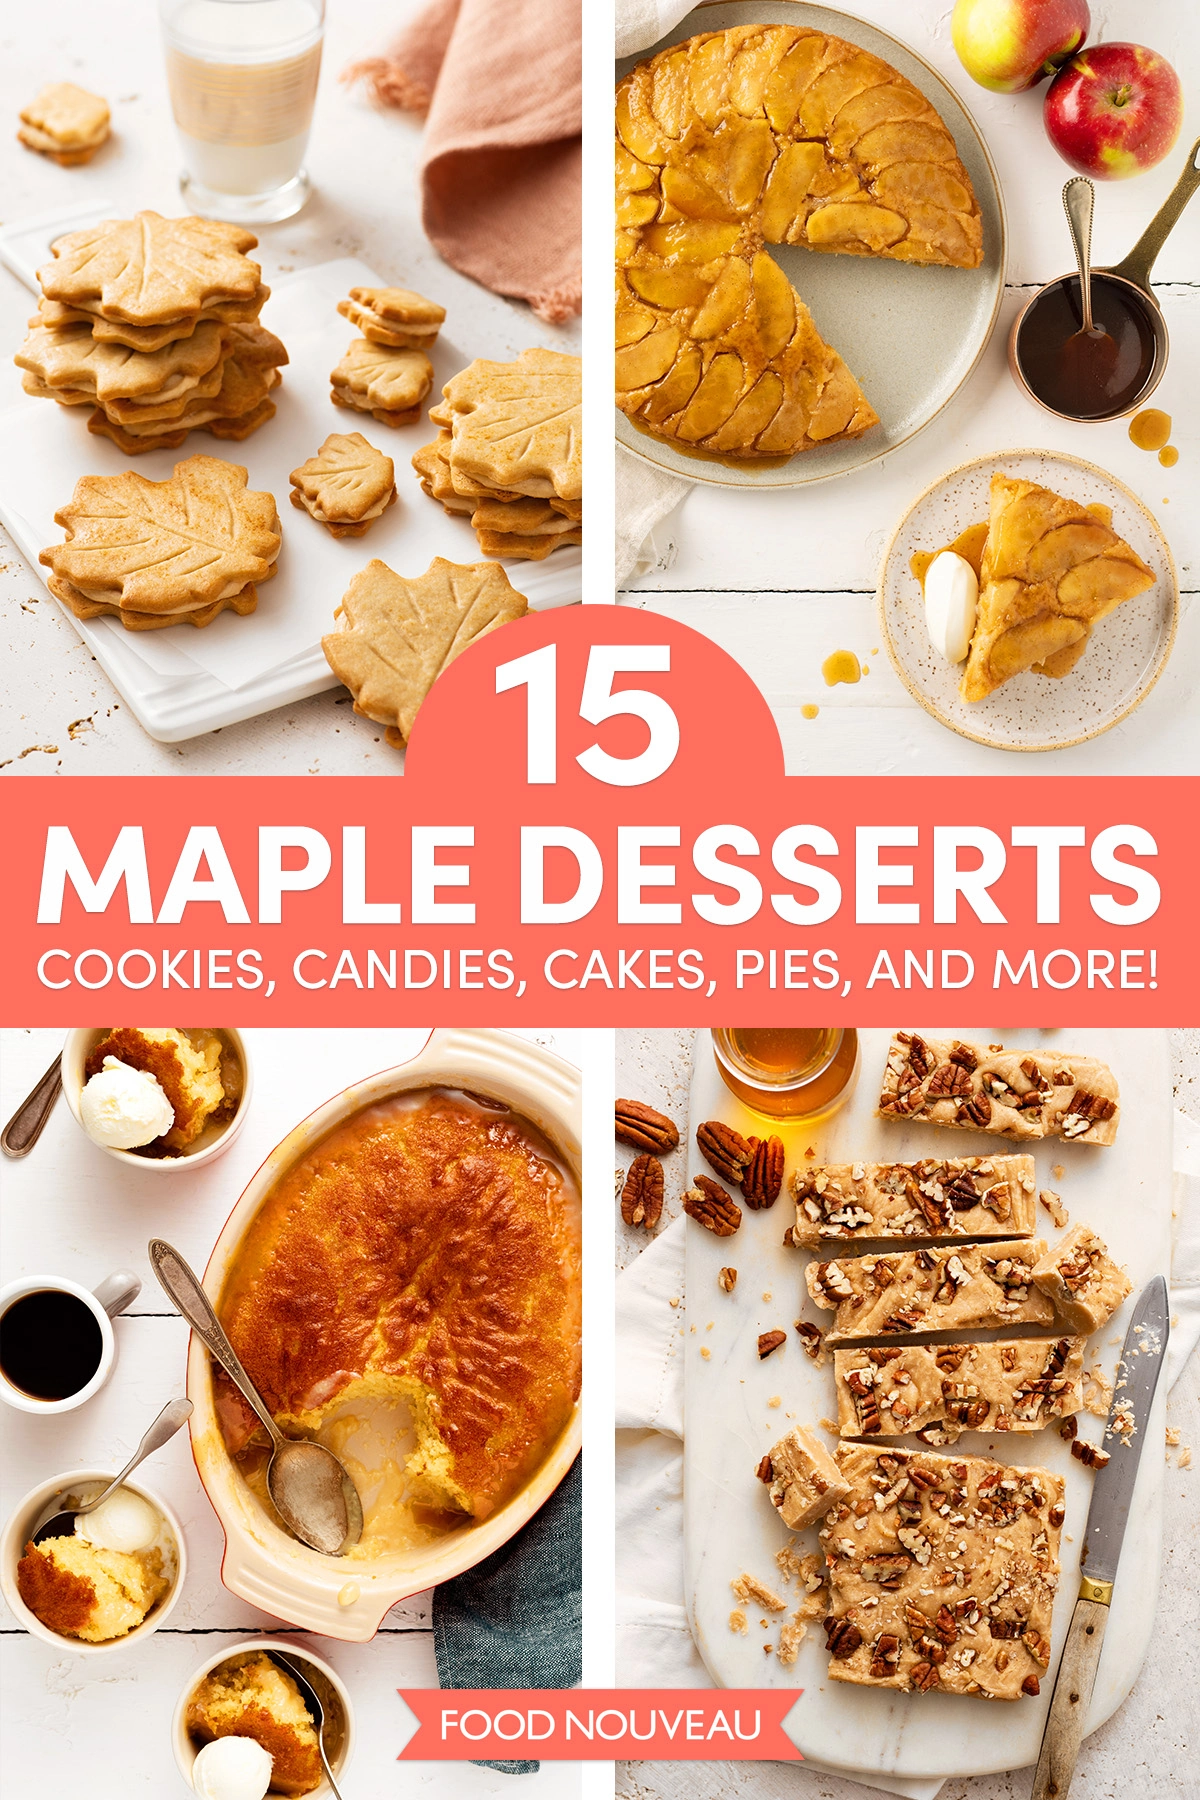 15 Maple Dessert Recipes: Cookies, Candies, Cakes, Pies, and More!